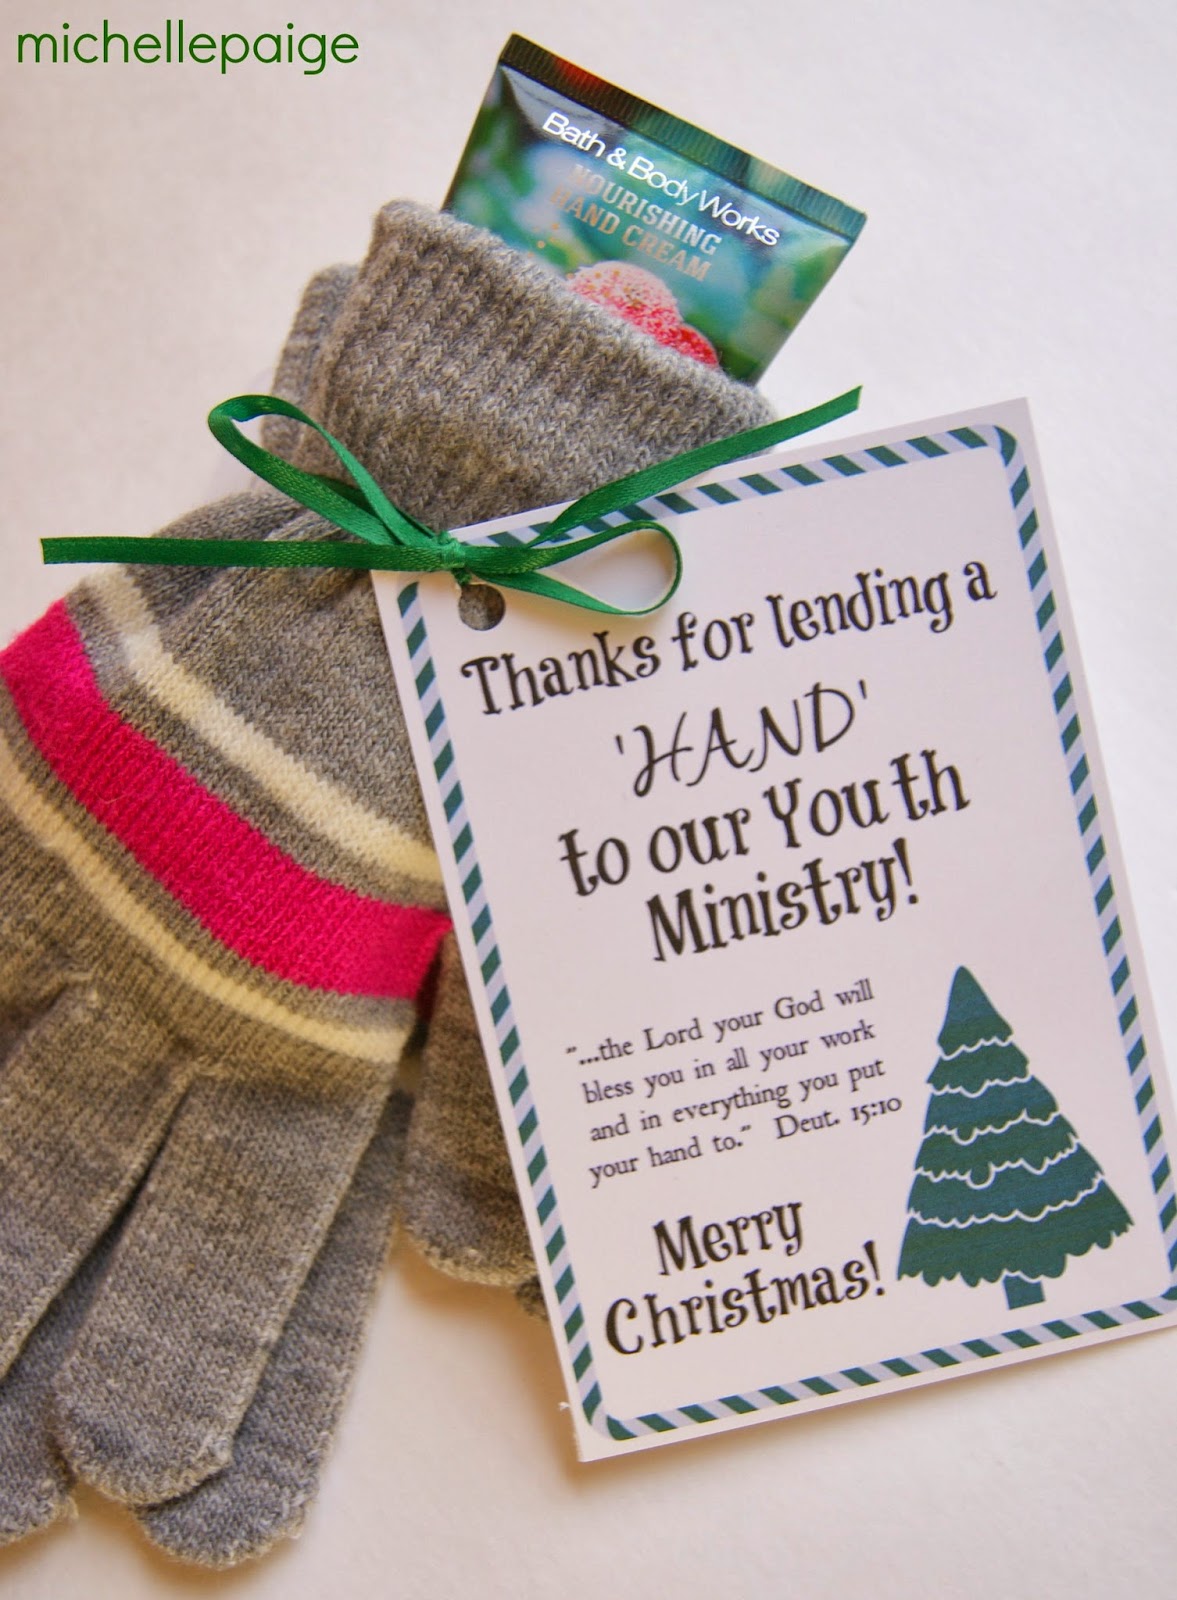 michelle paige blogs Youth Ministry and Children's Ministry Gift for